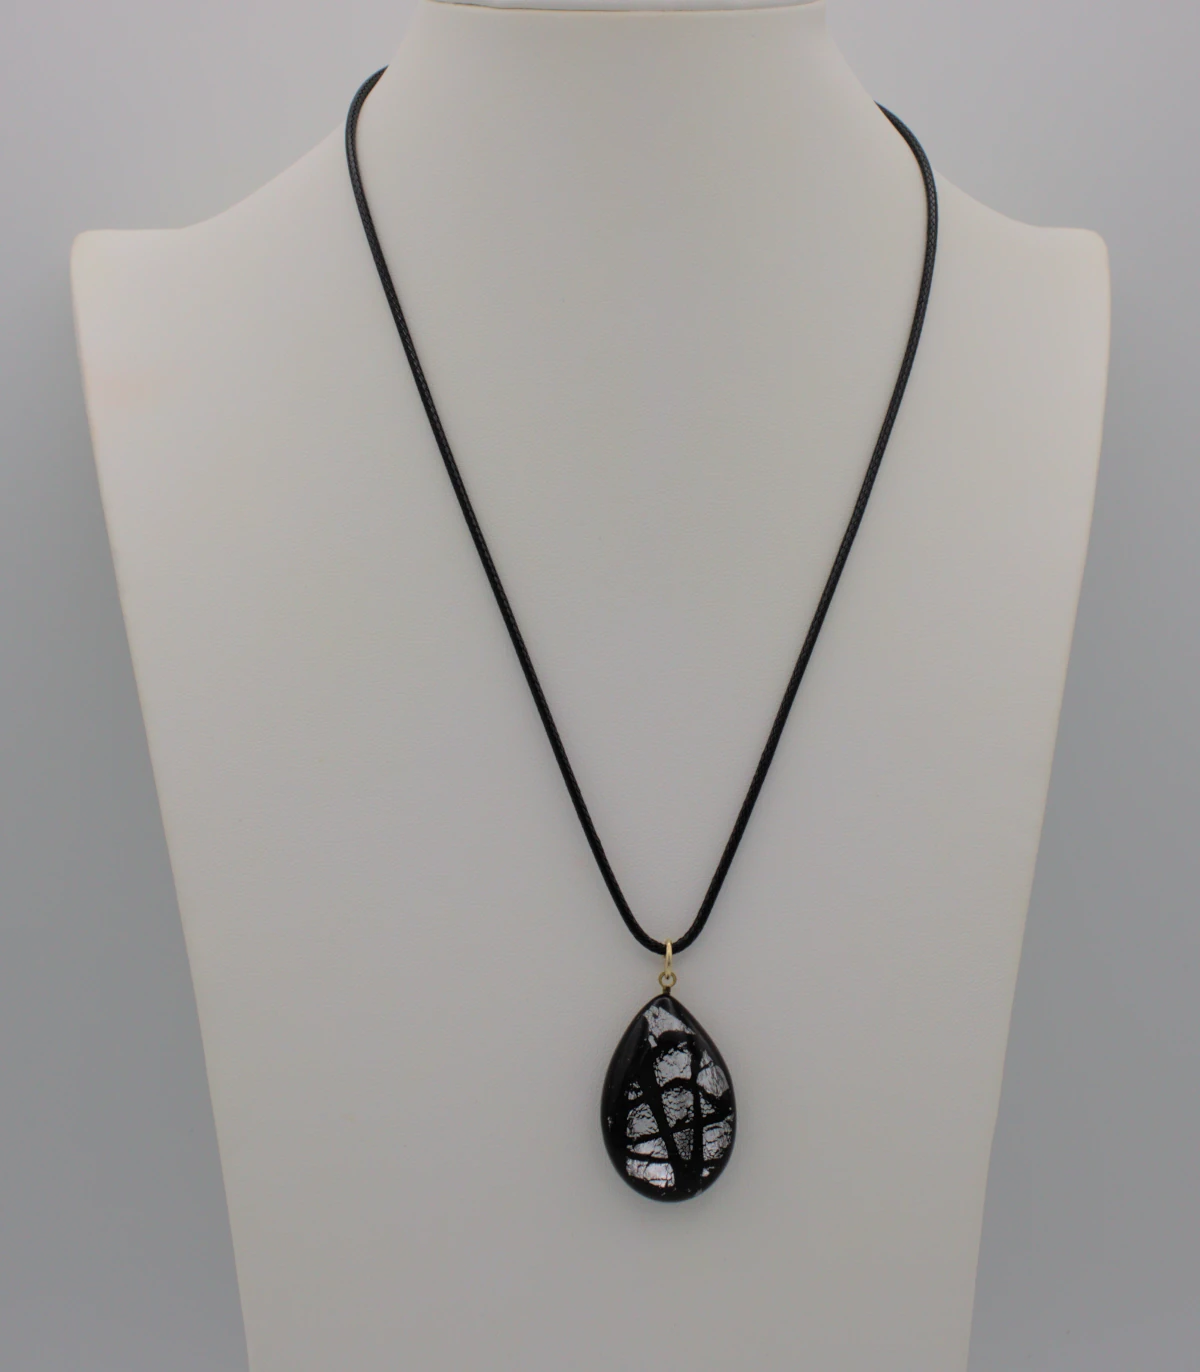 Murano black patterned glass on silver teardrop pendant on a black cotton cord